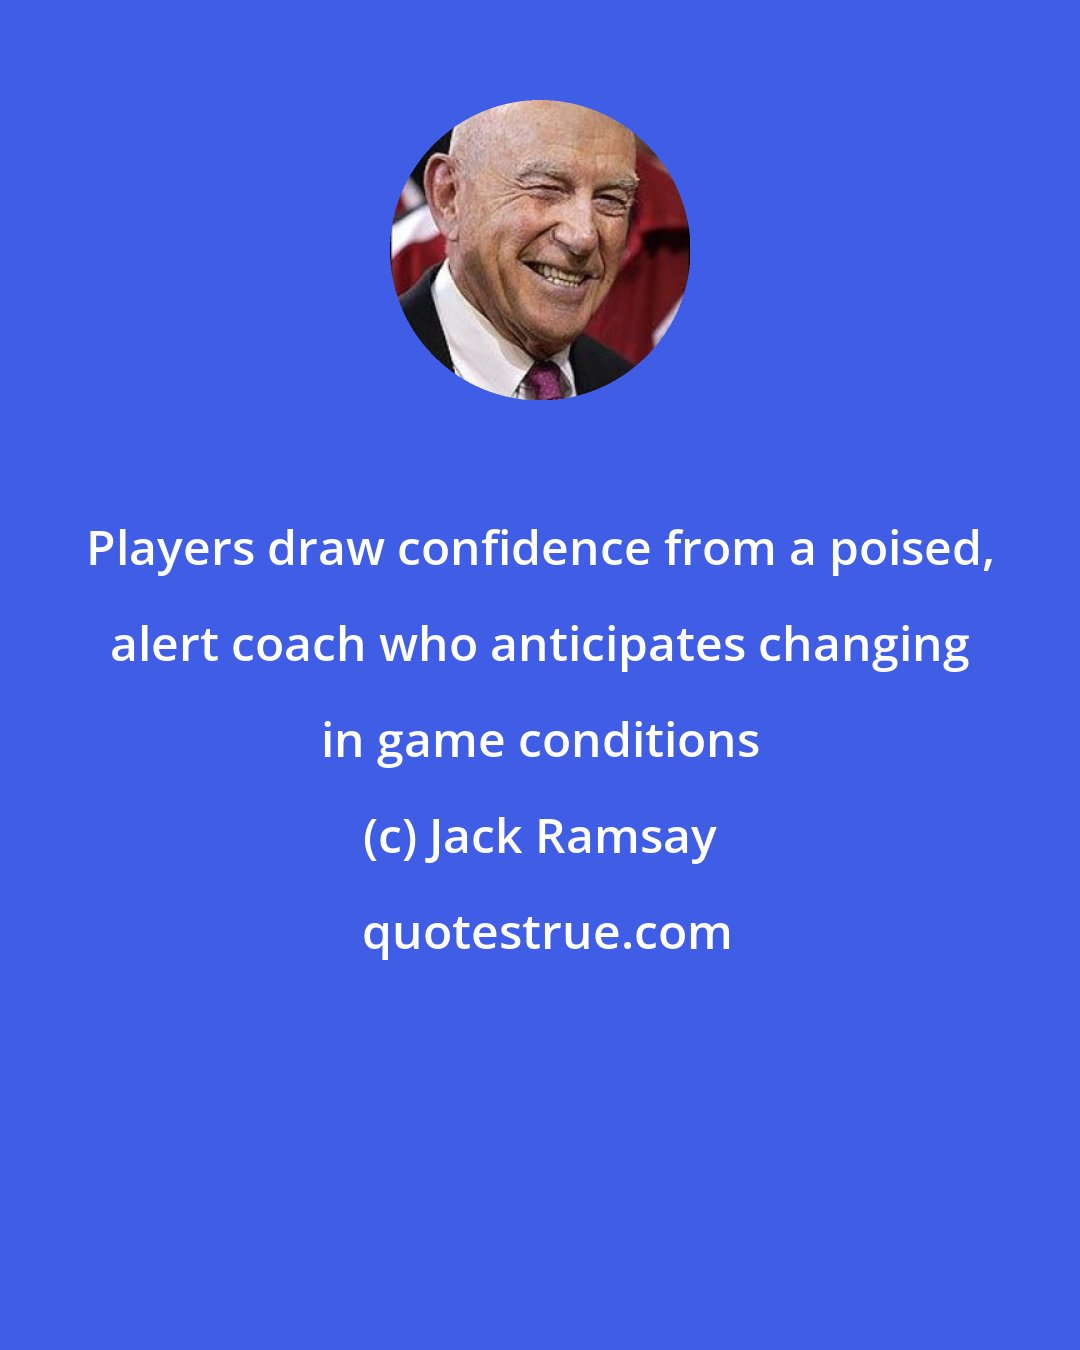 Jack Ramsay: Players draw confidence from a poised, alert coach who anticipates changing in game conditions